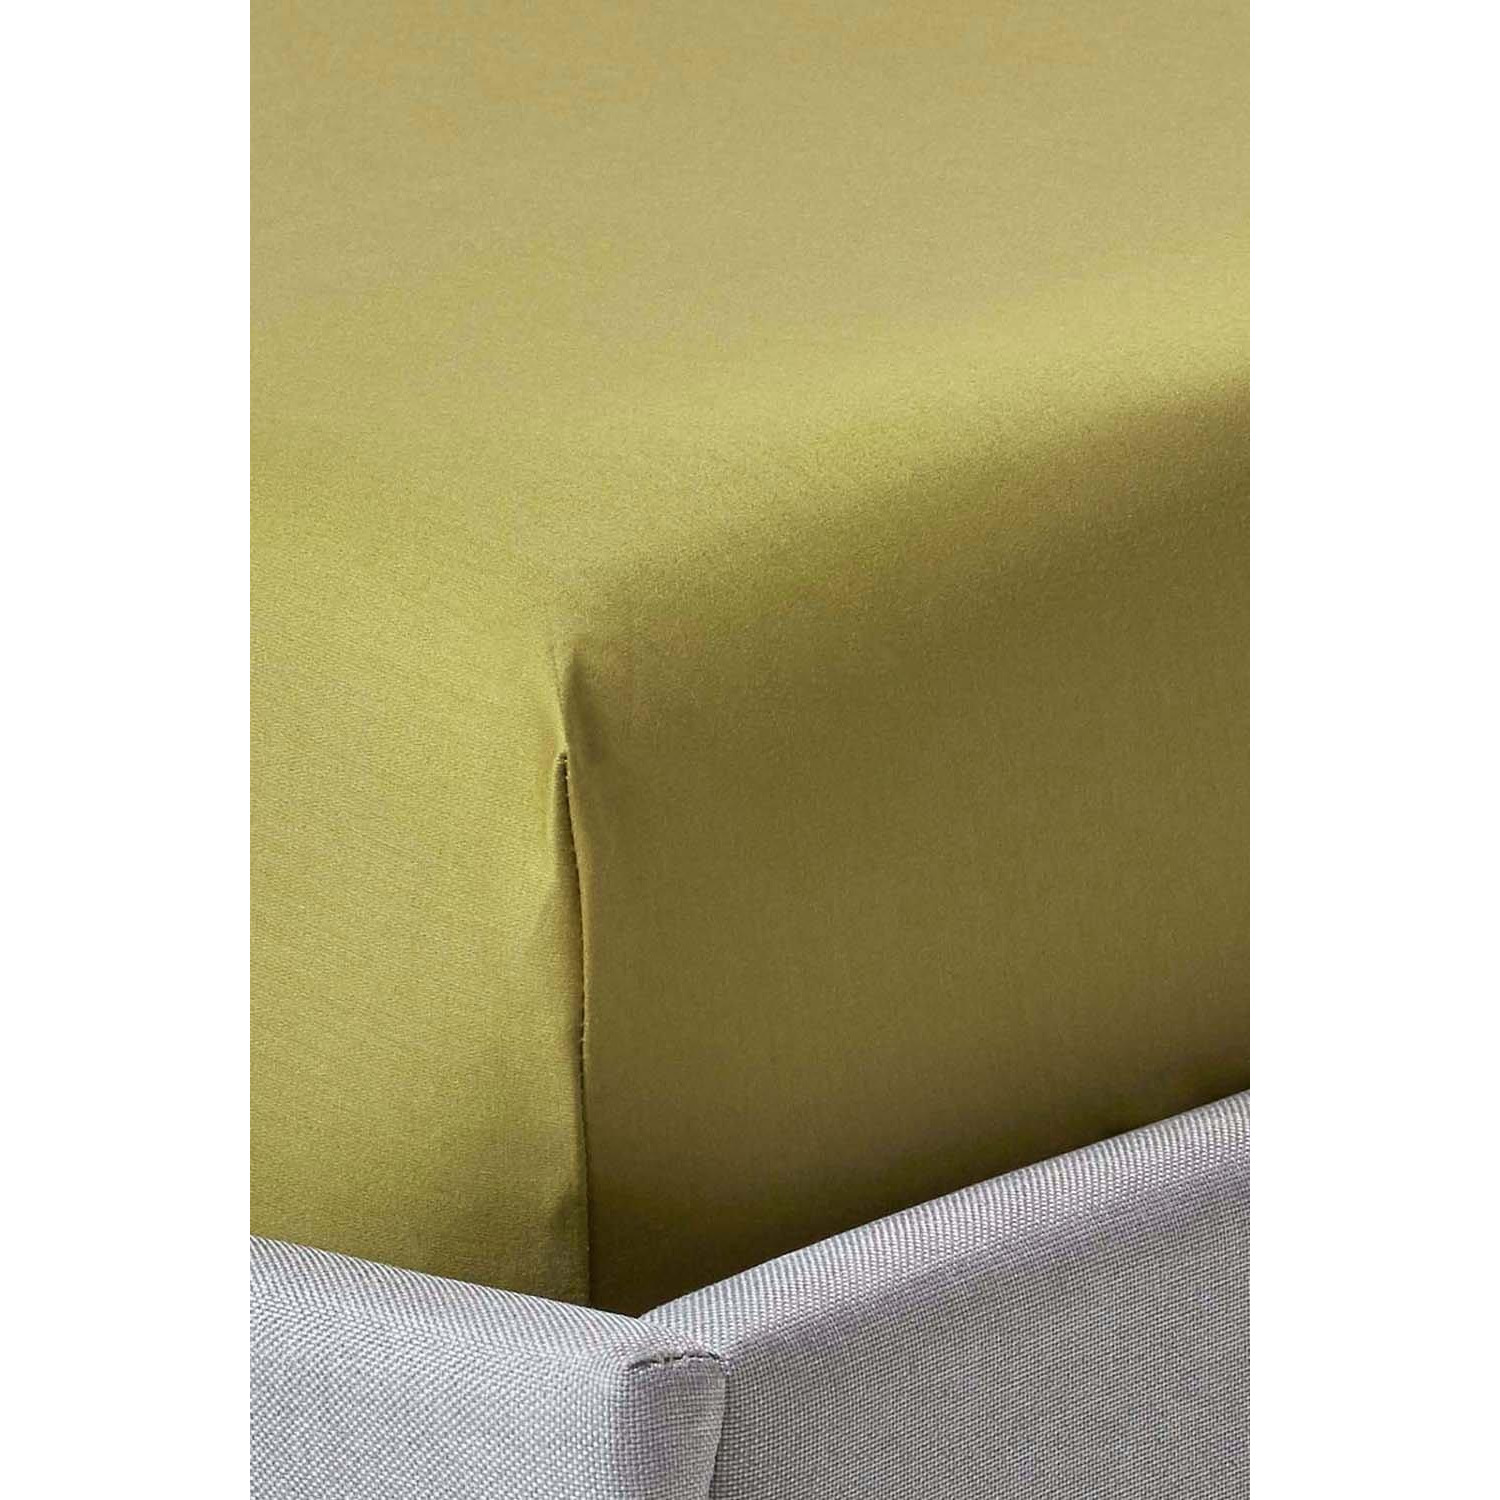 Egyptian Cotton Fitted Sheet 12 inch 1000 Thread Count - image 1